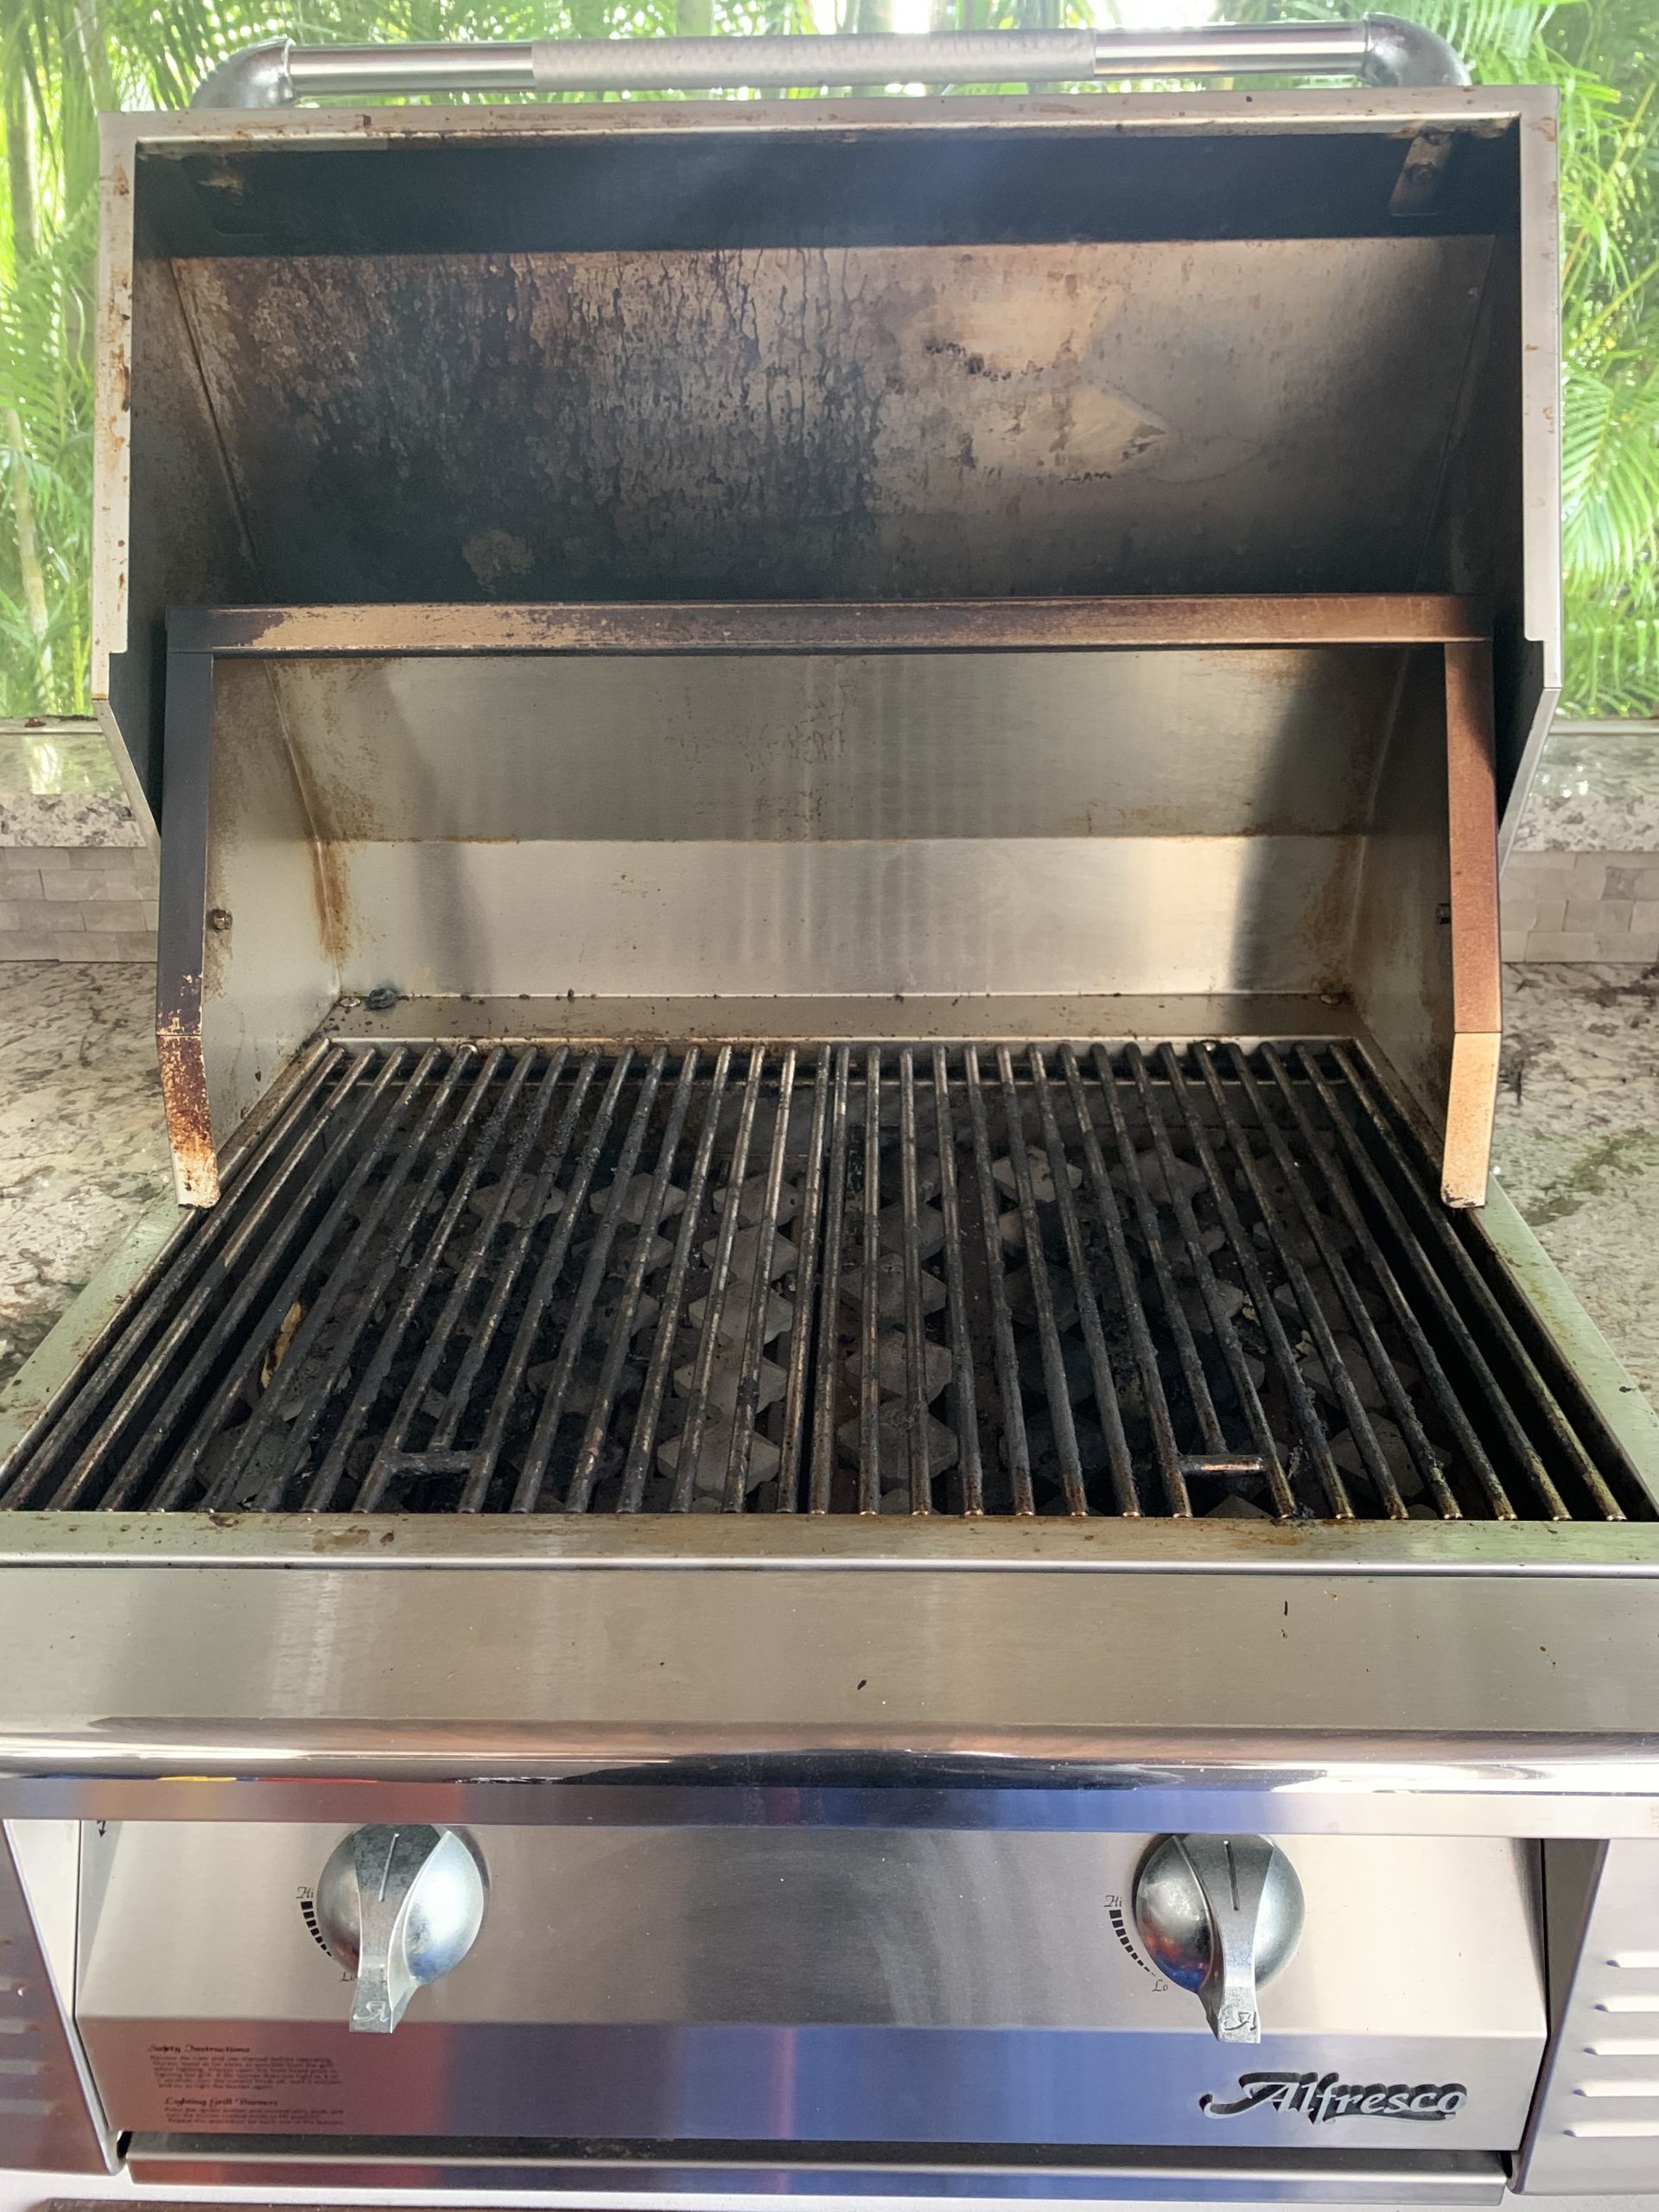 Grill Cleaners, BBQ Grill Cleaning Service